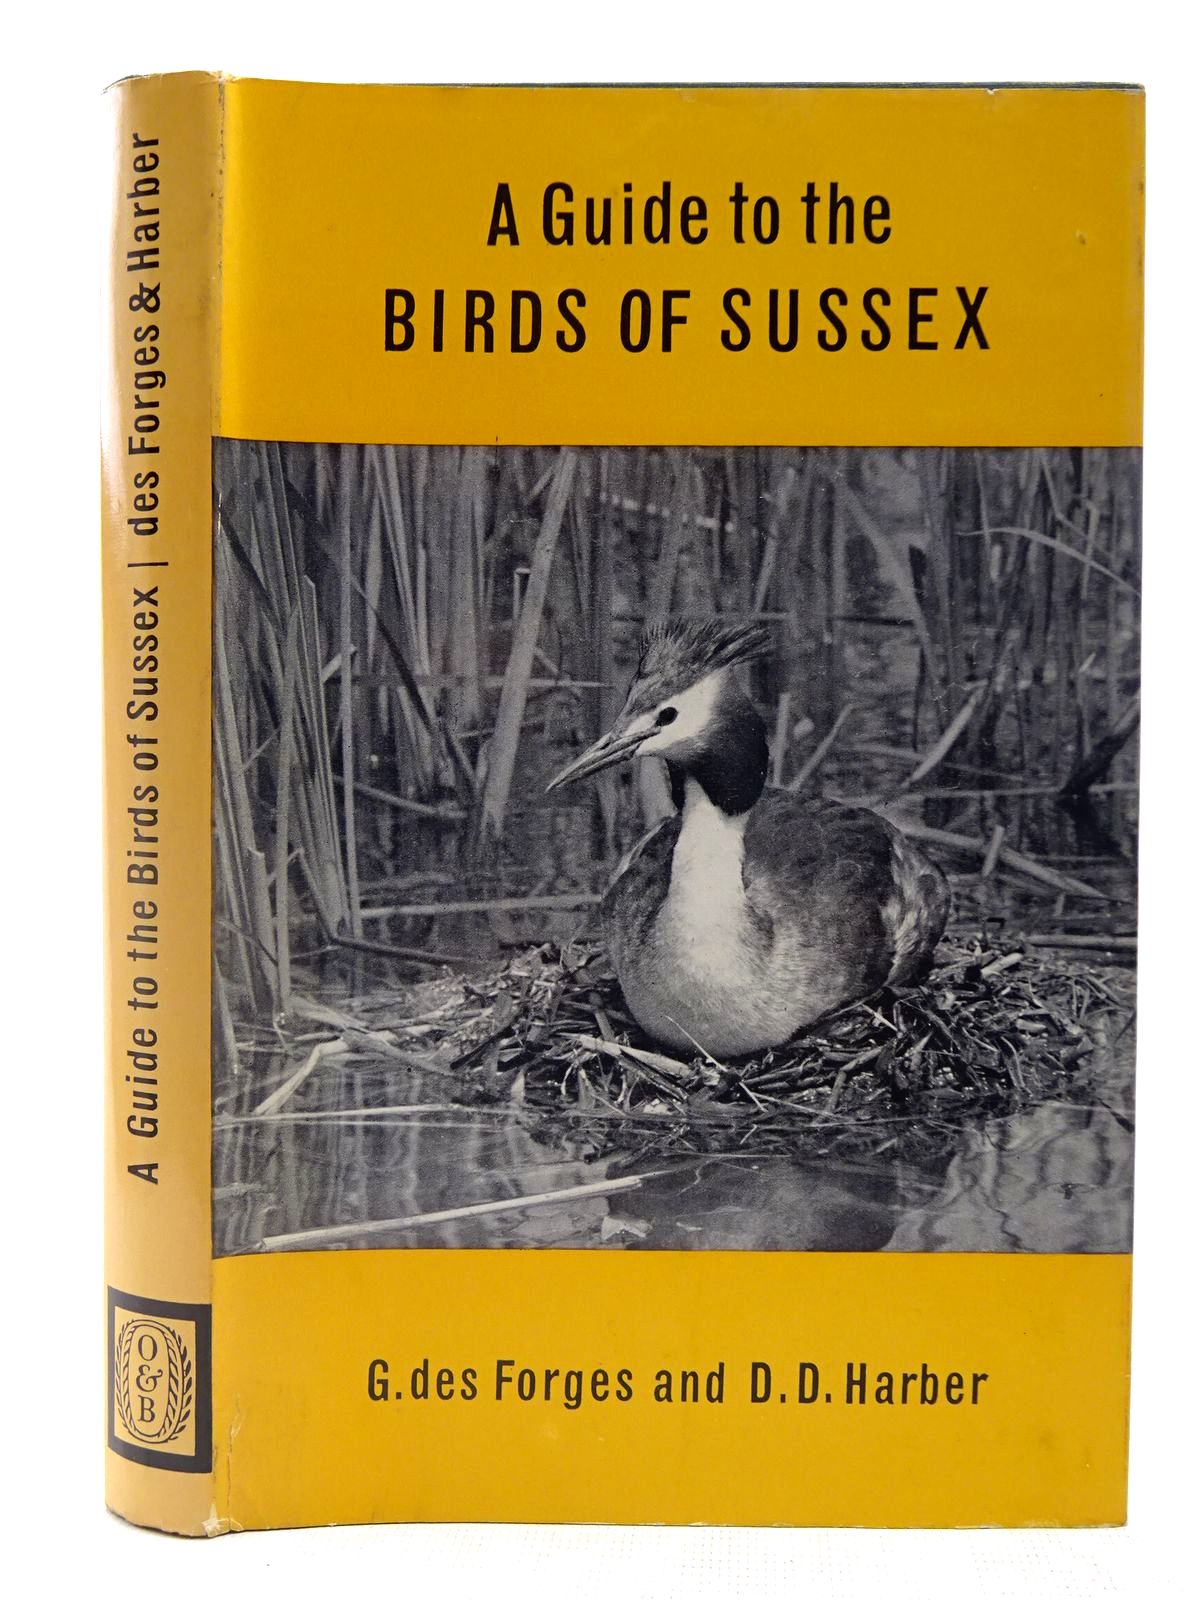 Photo of A GUIDE TO THE BIRDS OF SUSSEX written by Des Forges, G.
Harber, D.D. published by Oliver & Boyd (STOCK CODE: 2127599)  for sale by Stella & Rose's Books